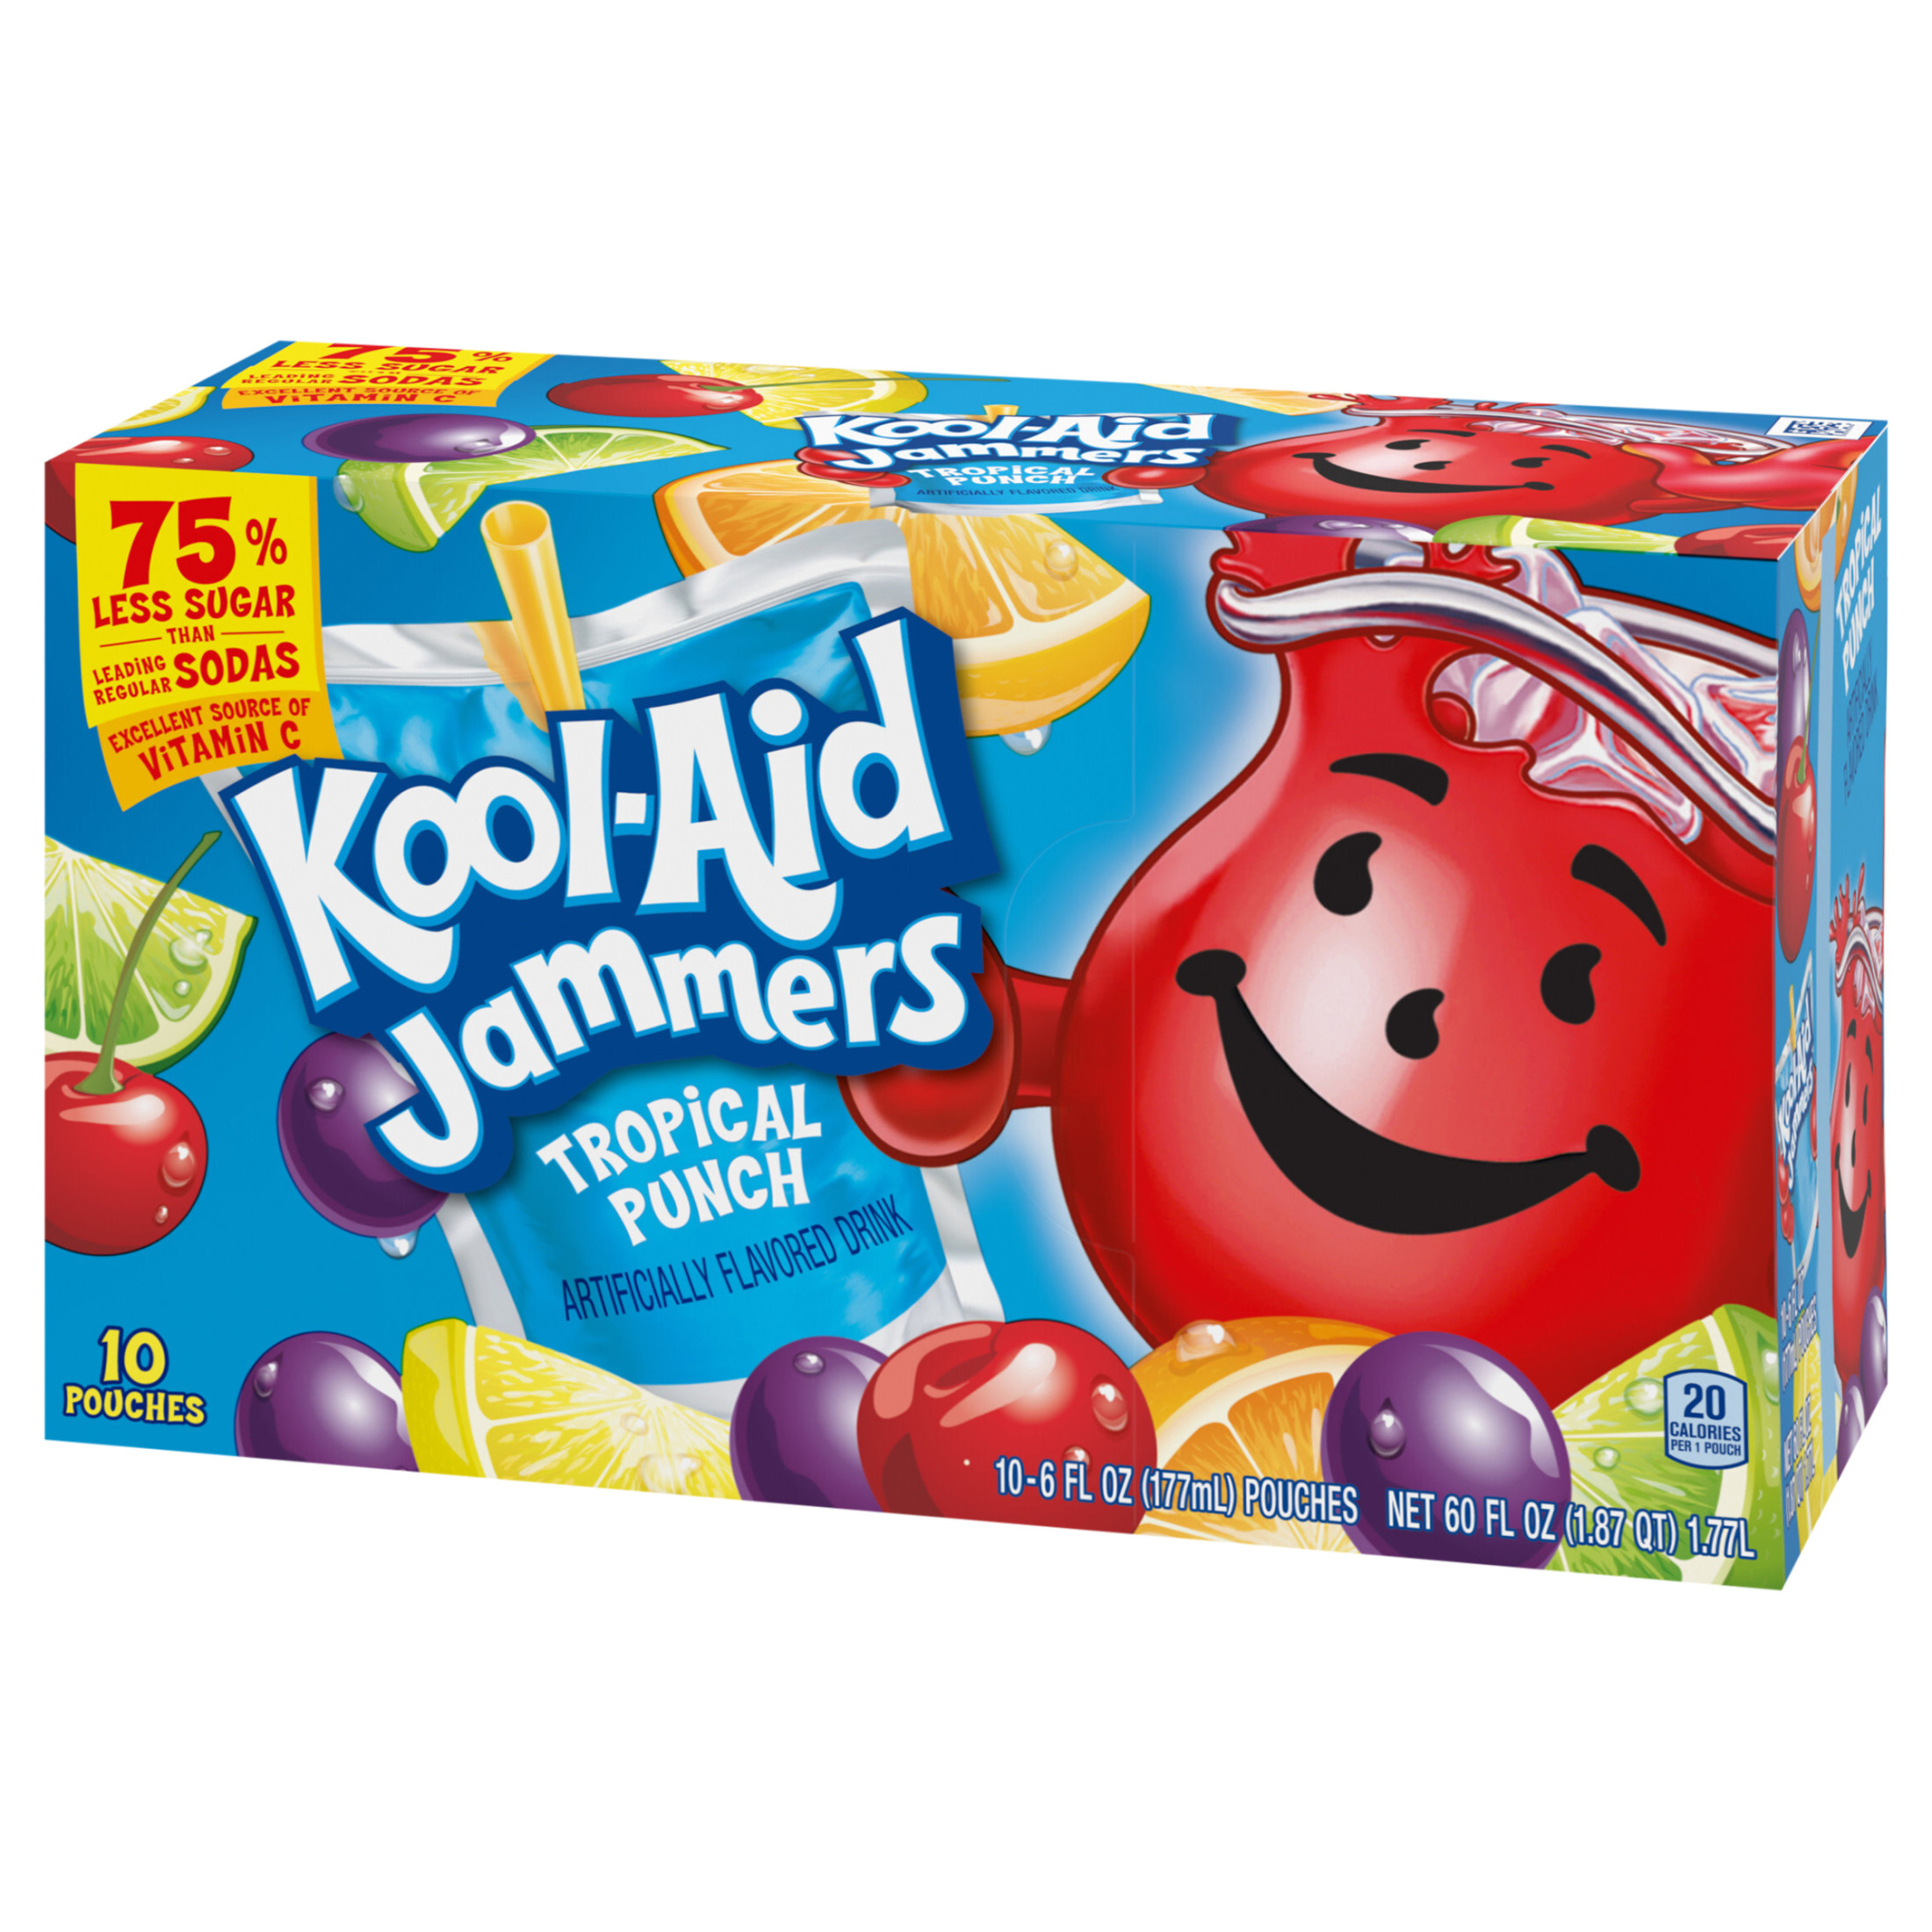 Kool Aid Jammers Tropical Punch Kids Drink 0% Juice Box Pouches, 10 Ct Box, 6 fl oz Pouches - image 5 of 7